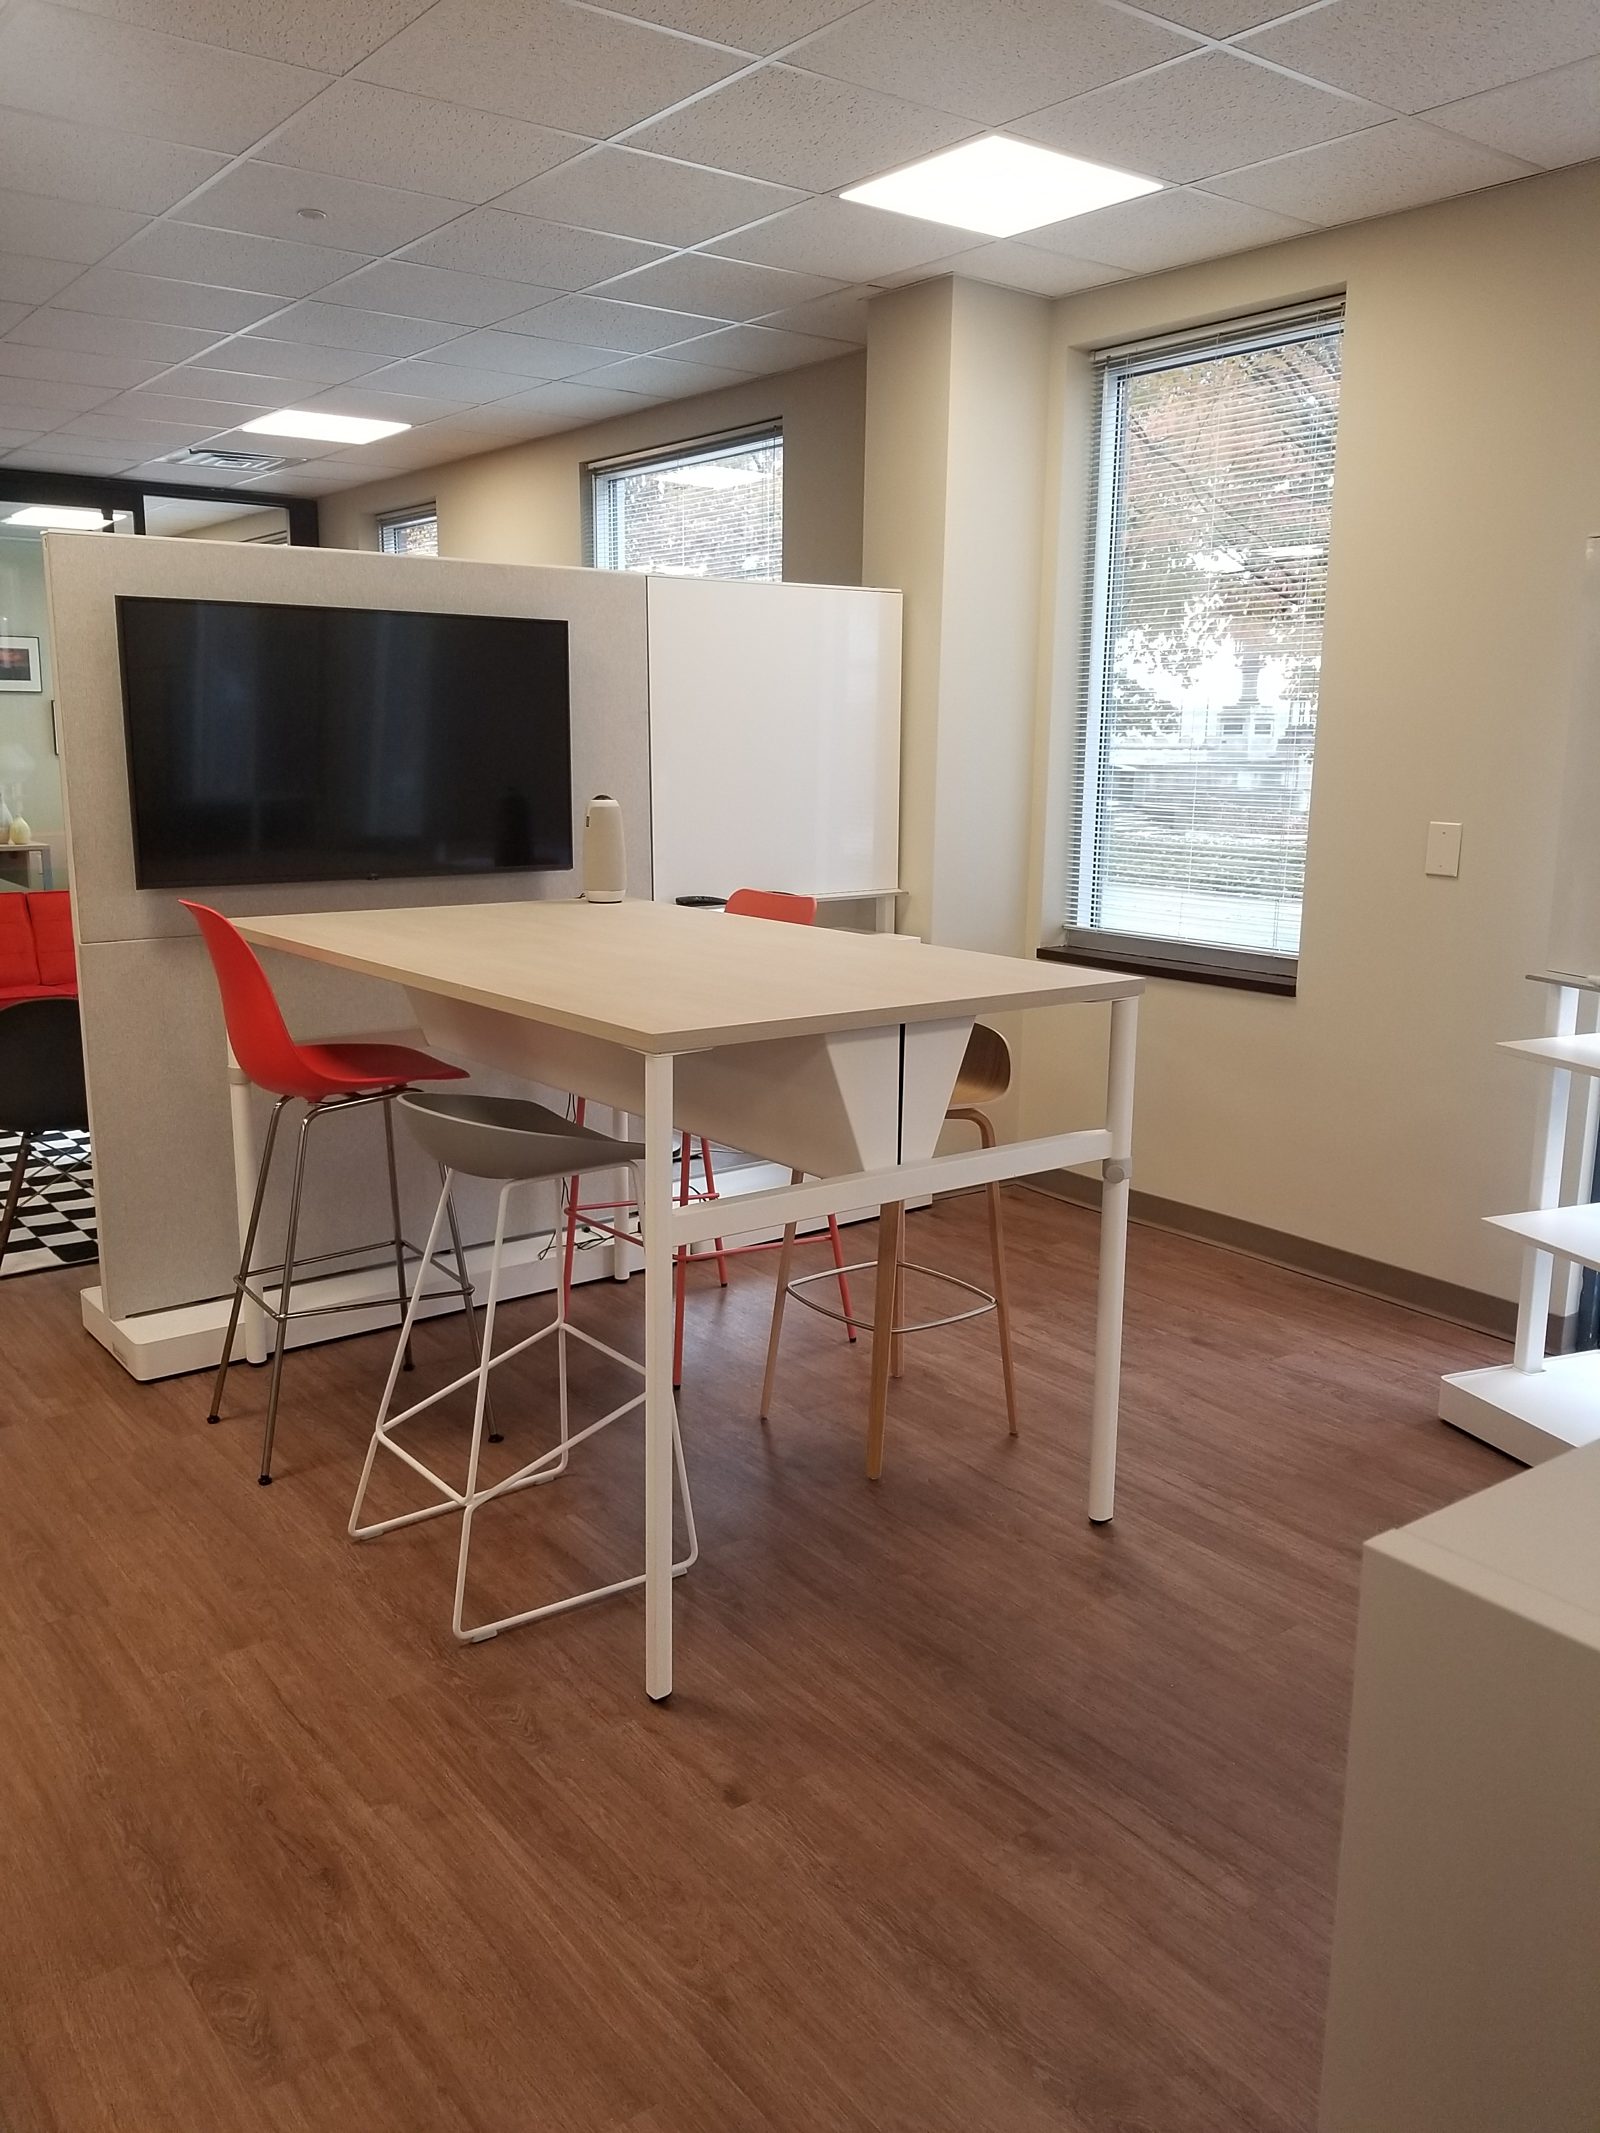 Bar-height collaborative table with a variety of 4 stools around it; Herman Miller OE1 Agile Walls behind table, one with a large TV screen attached.